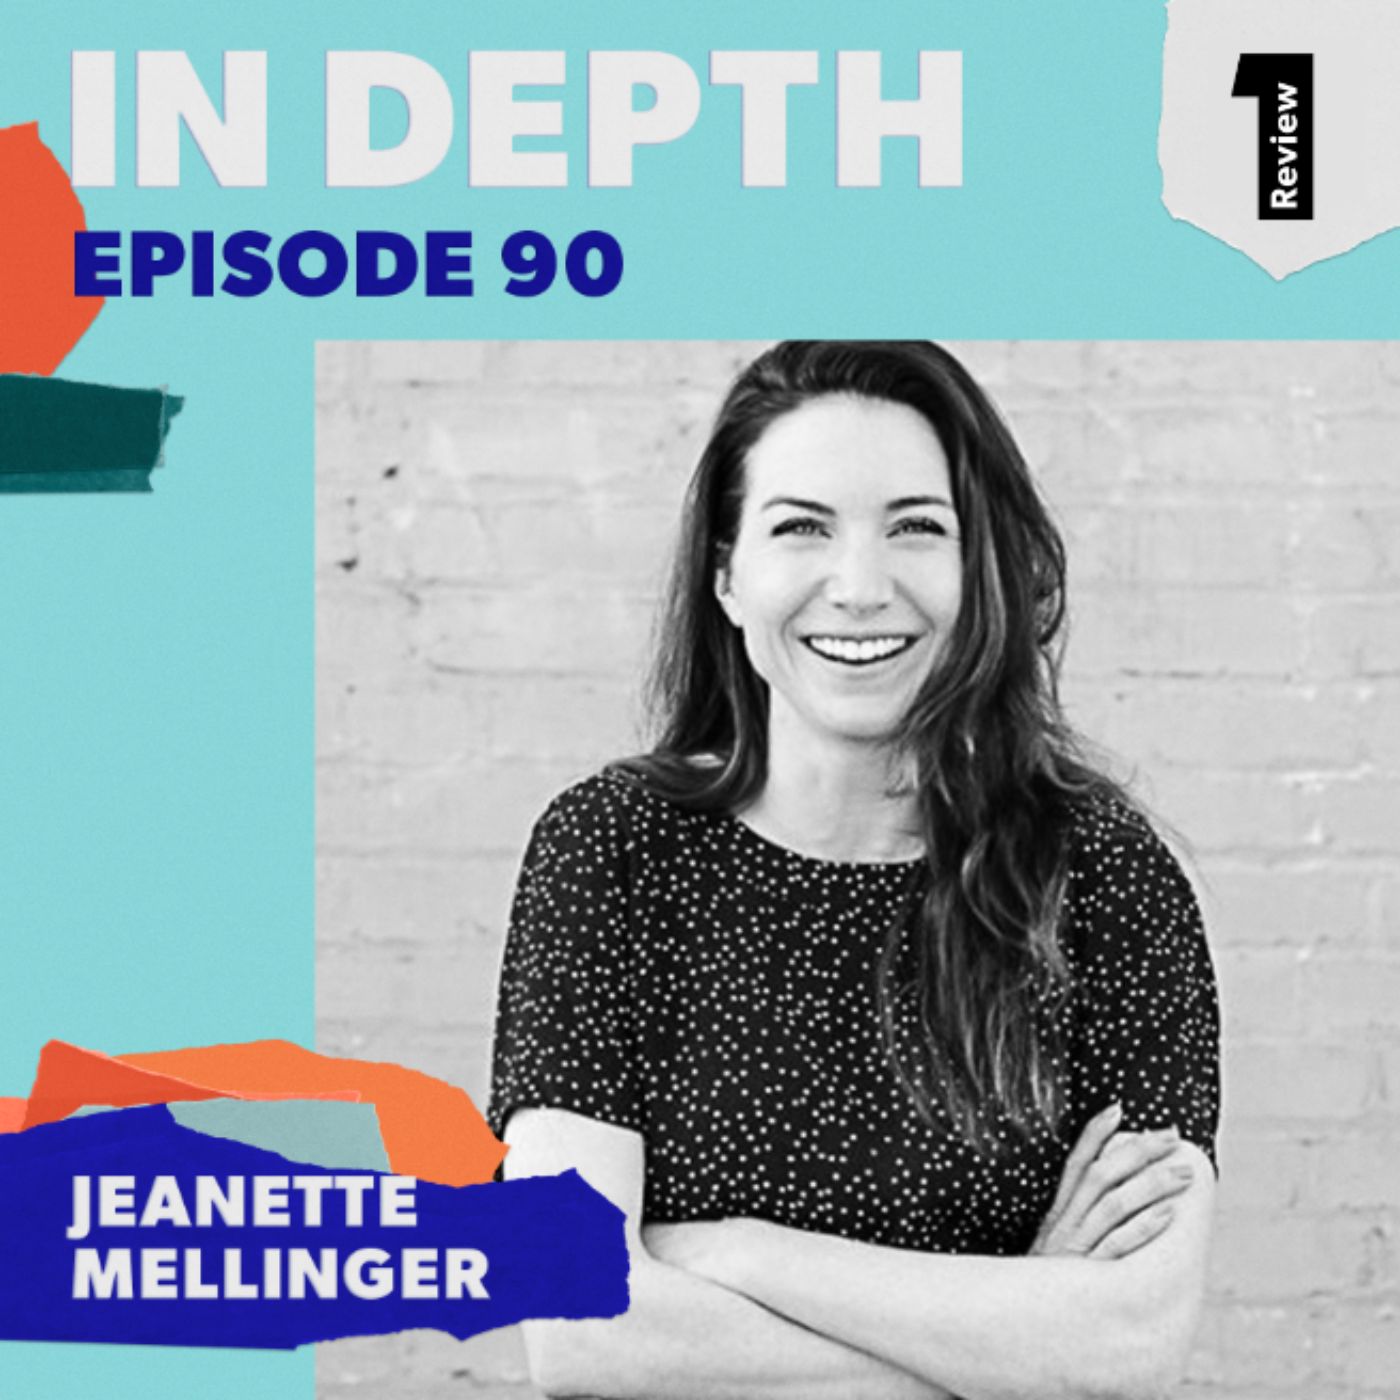 The early user research playbook for founders — Jeanette Mellinger’s expert advice for validating your idea with high-quality interviews